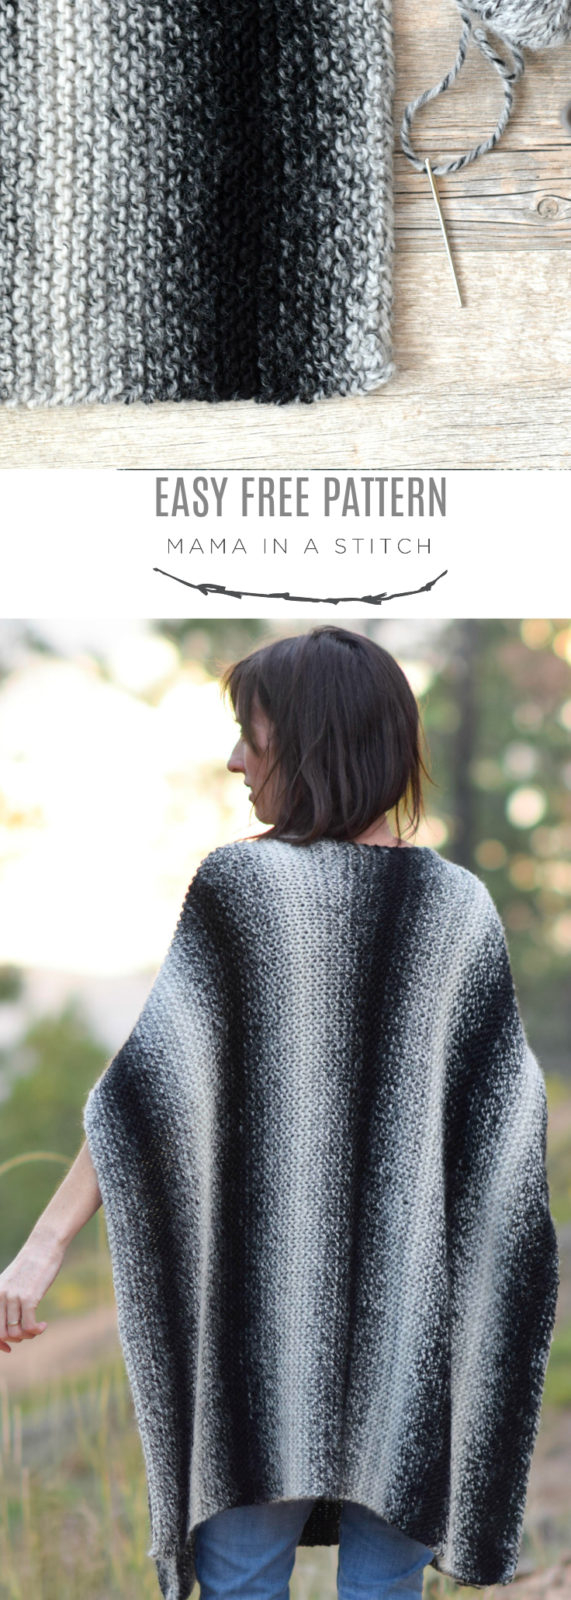 Free Knitting Pattern For A Poncho Aspen Relaxed Knit Poncho Pattern Mama In A Stitch